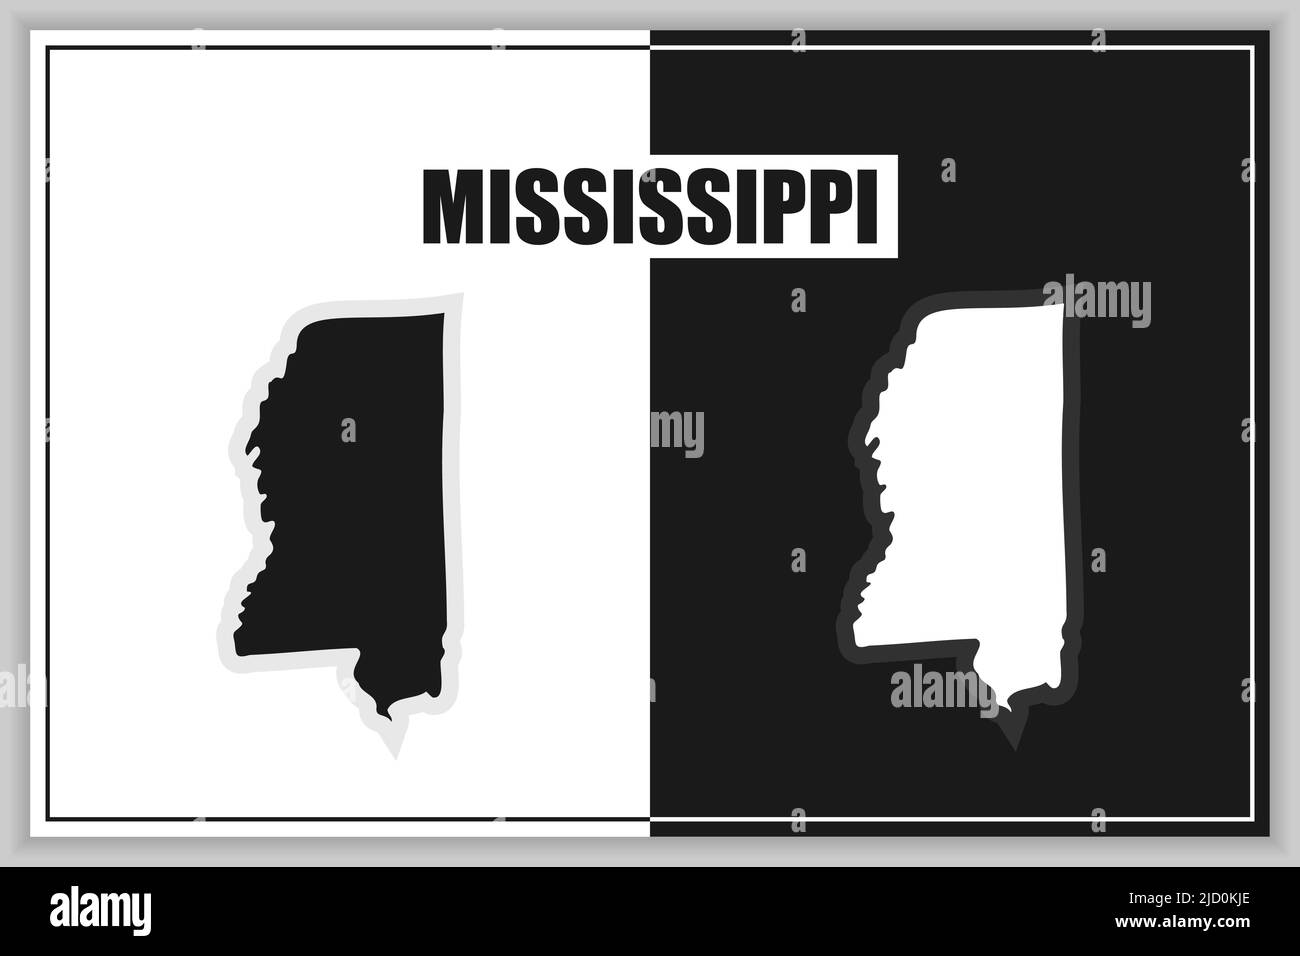 Flat style map of State of Mississippi, USA. Mississippi outline. Vector illustration Stock Vector